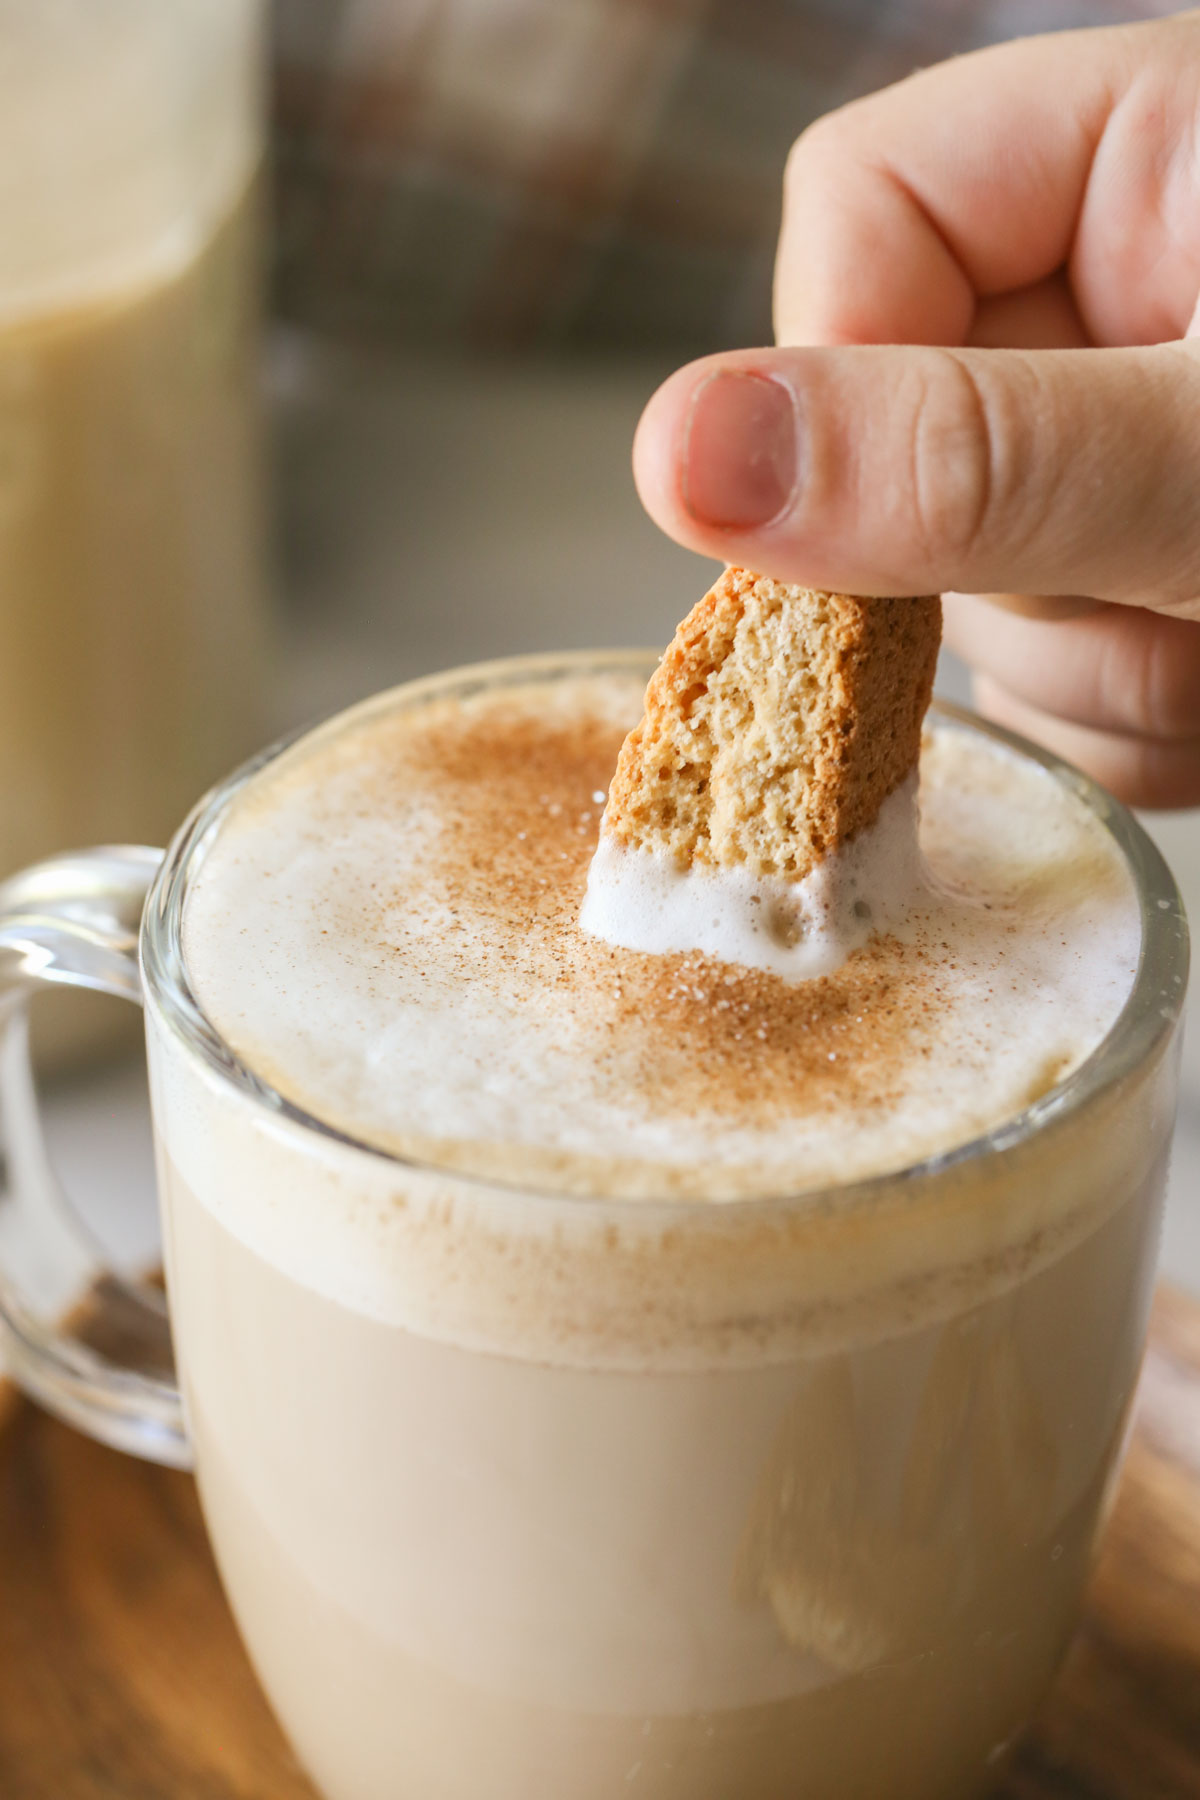 A close up shot of a hand dipping biscotti into a latte in a glass mug, that has Brown Sugar and Cinnamon Coffee Creamer in it and has been dusted with cinnamon and sugar.